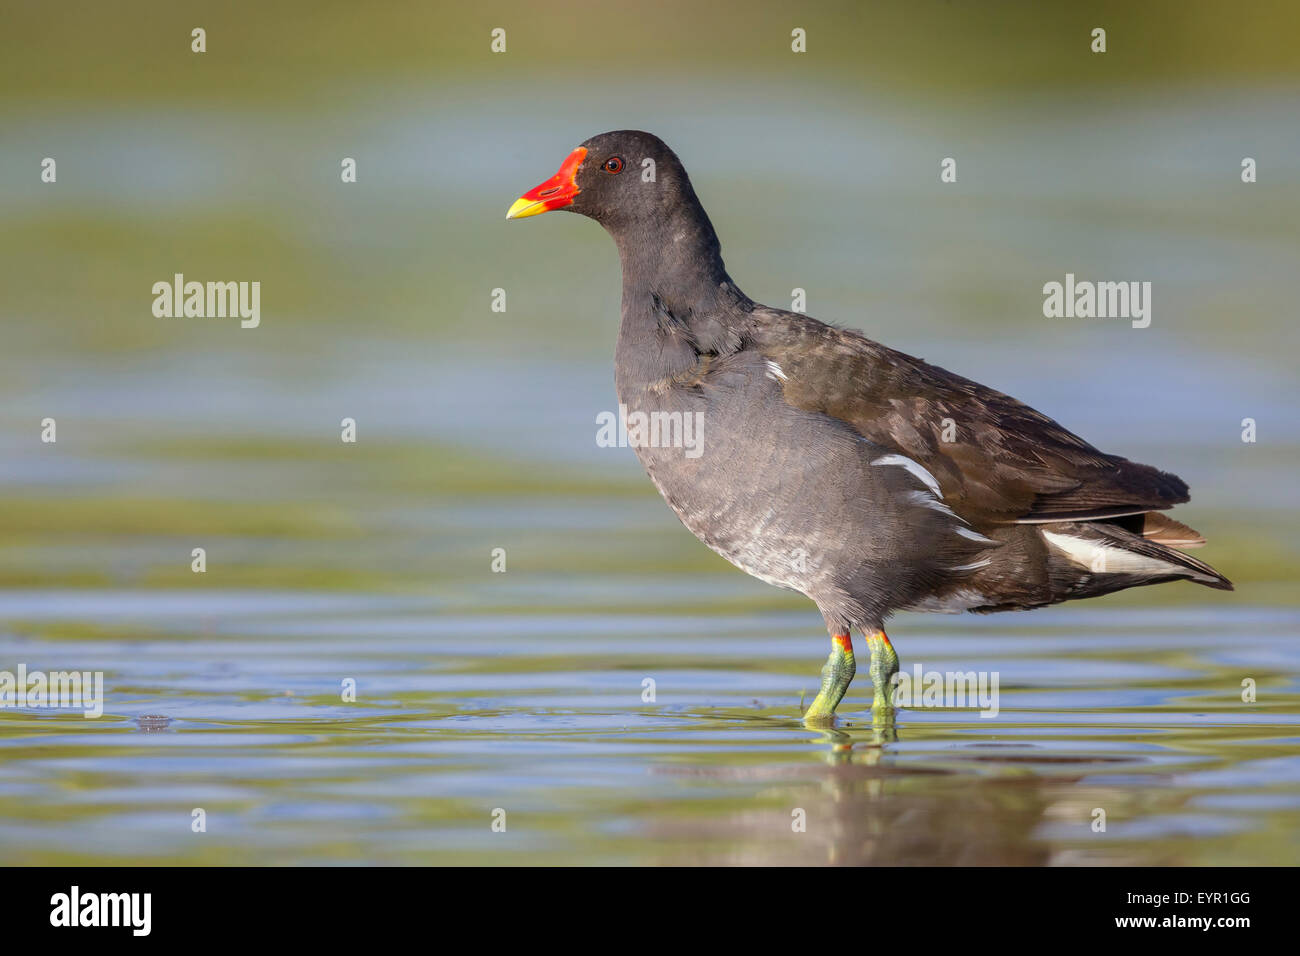 Common Moorhen, Adult standing in the water, Campania, Italy Stock Photo